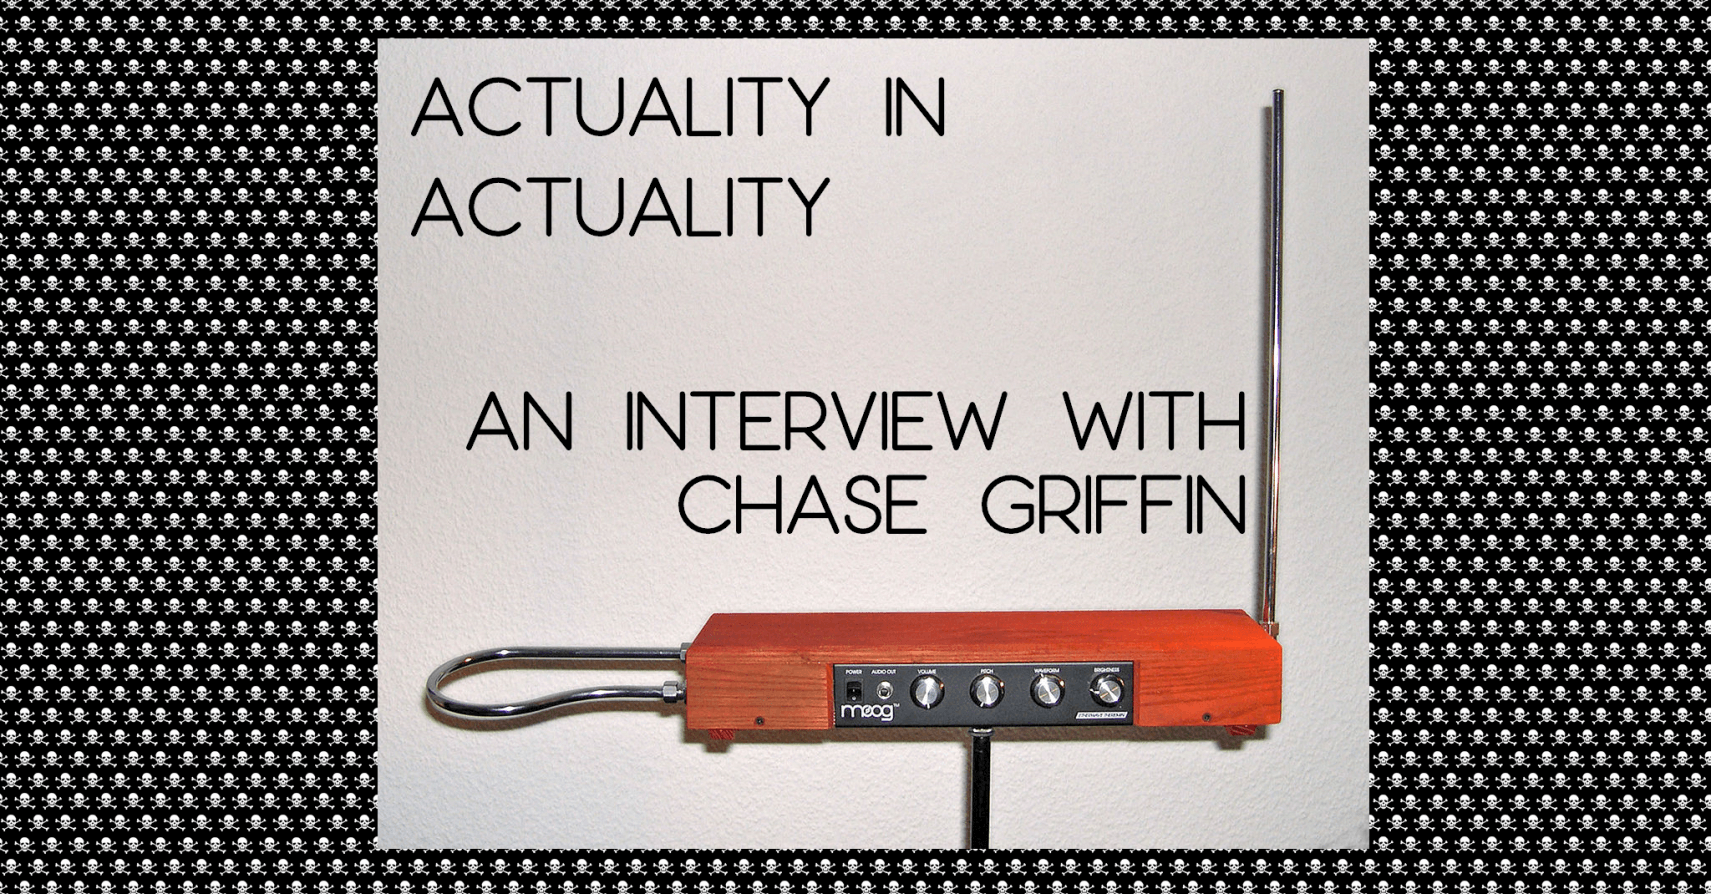 ACTUALITY IN ACTUALITY: An Interview with Chase Griffin